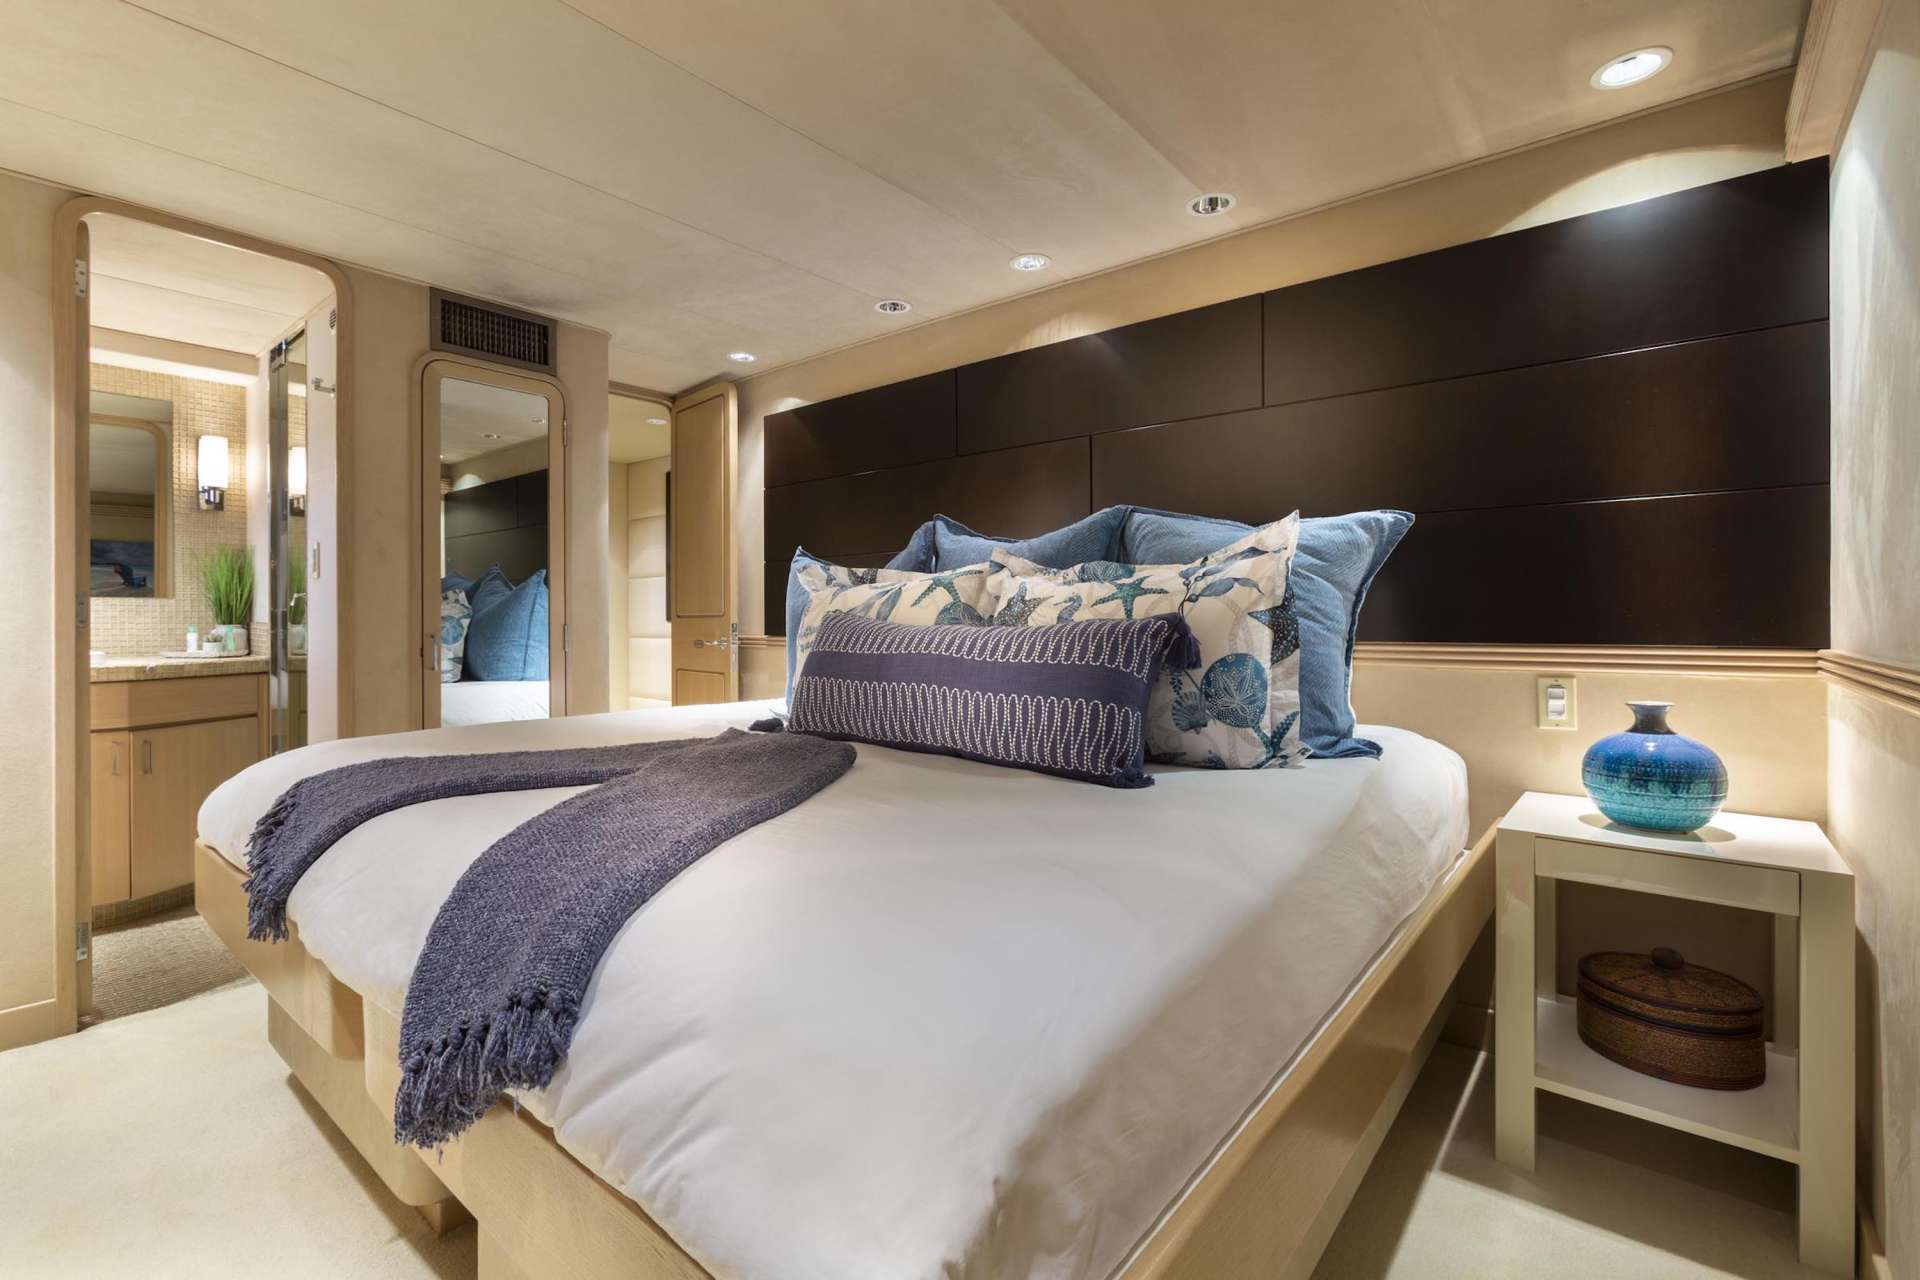 Motor Yacht 'CRU' Guest King Stateroom (converts to  twin), 6 PAX, 4 Crew, 96.00 Ft, 29.00 Meters, Built 1991, Westship, Refit Year 2019